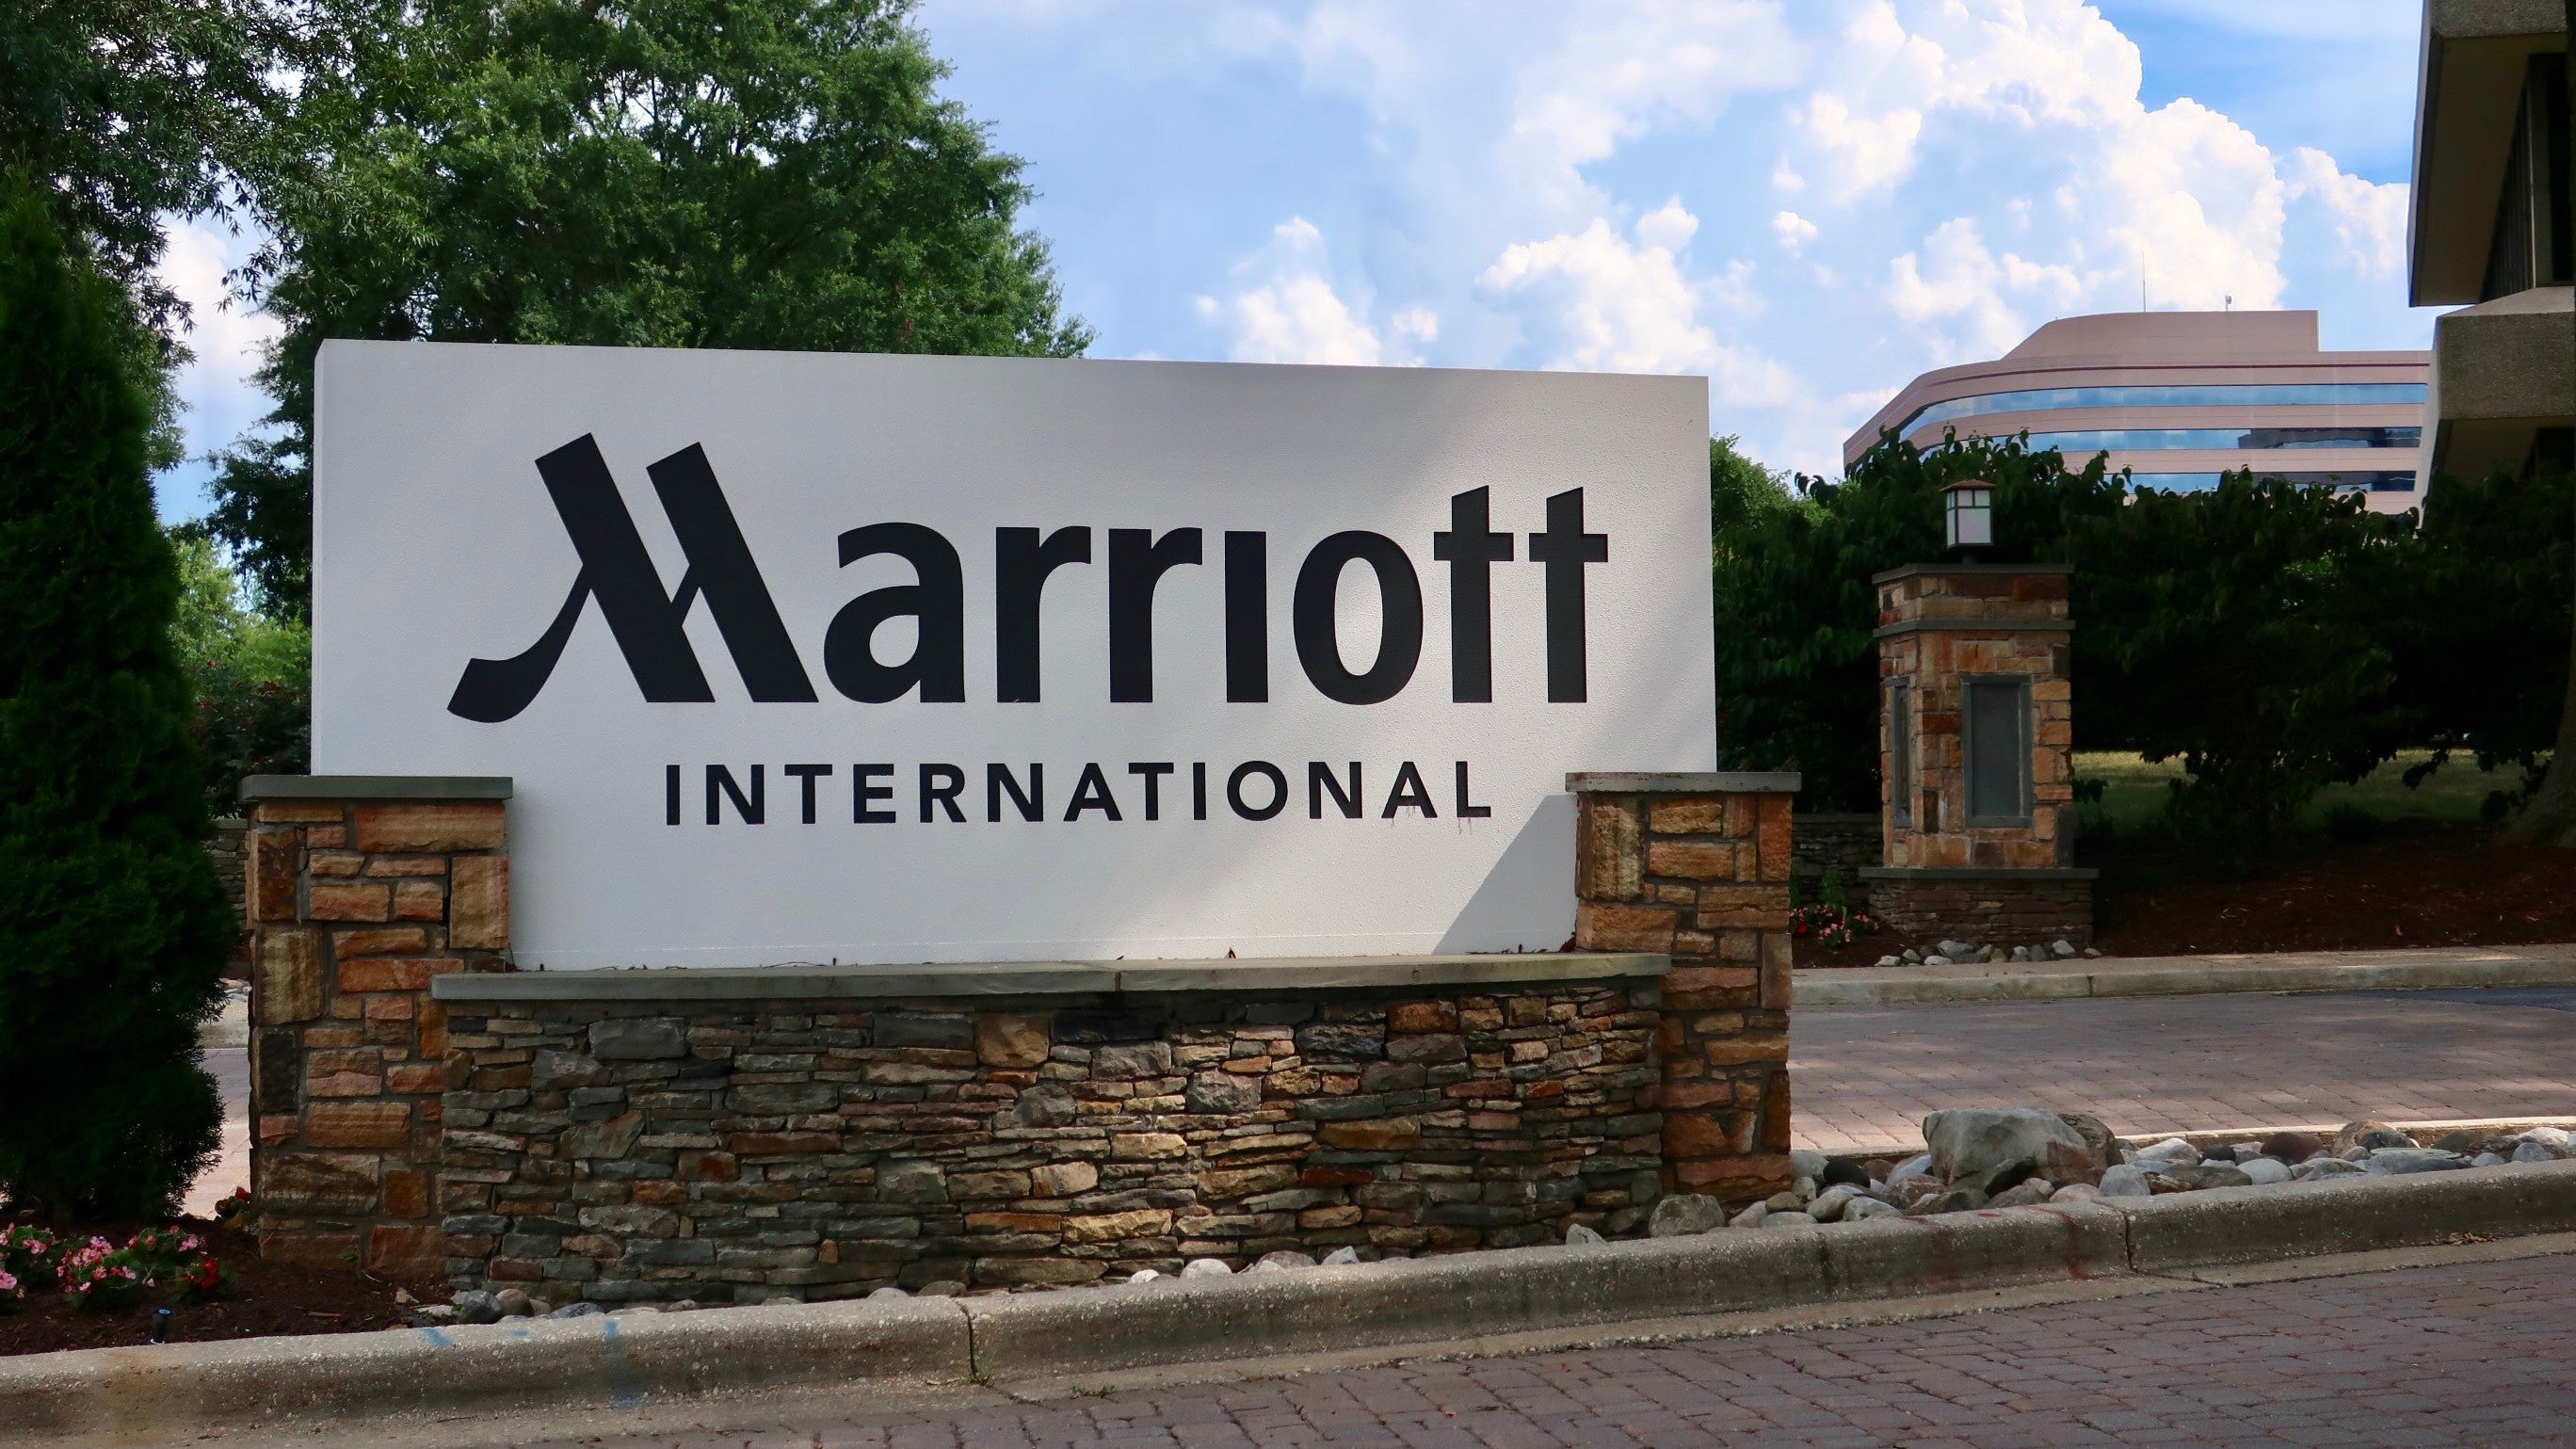 What You Need To Know About Marriott’s Recent Data Breach